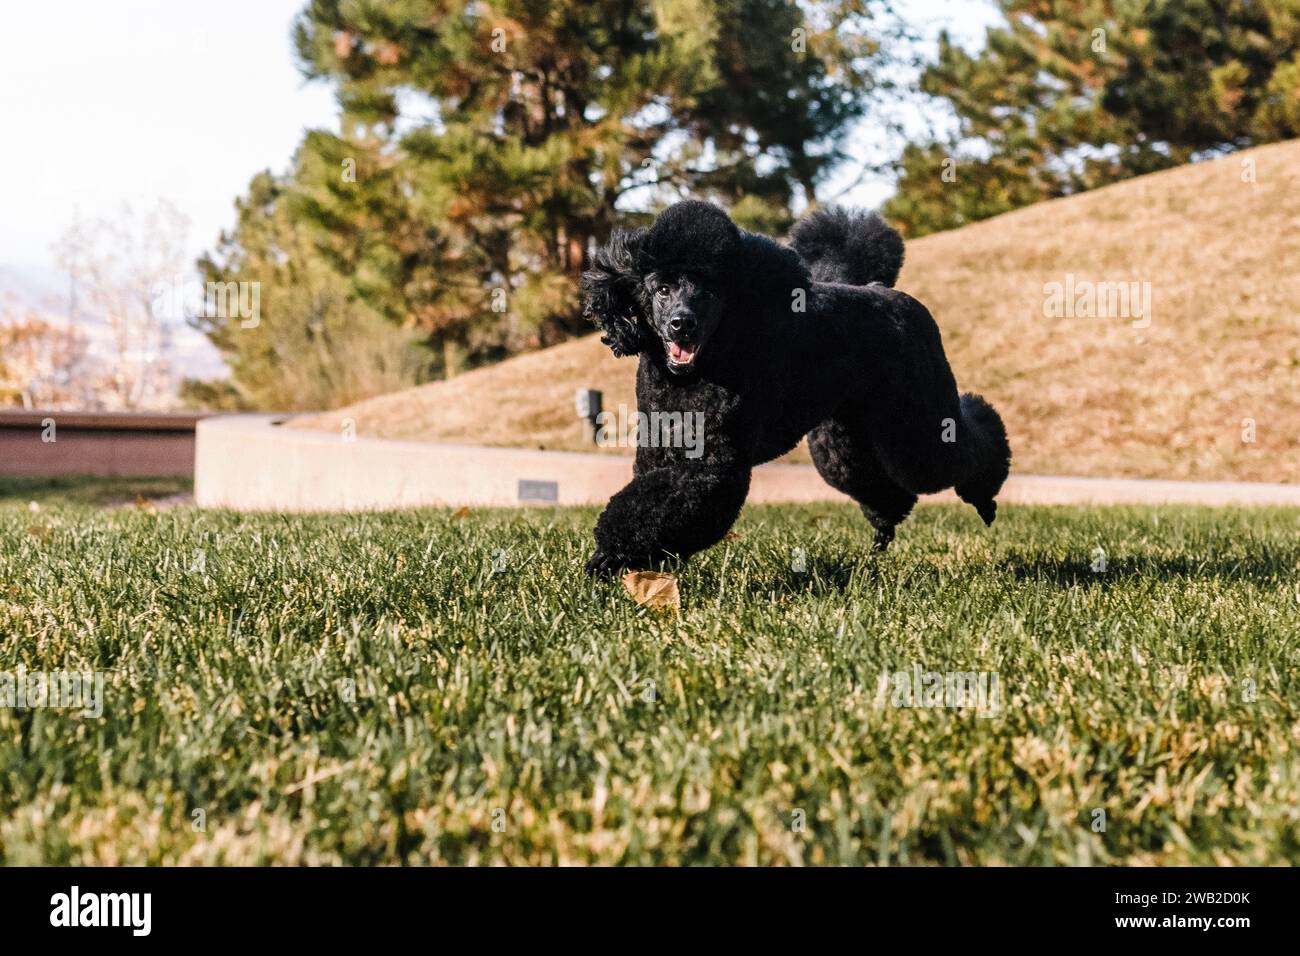 Black Miniature Poodle running and playing in grass at golden hour Stock Photo